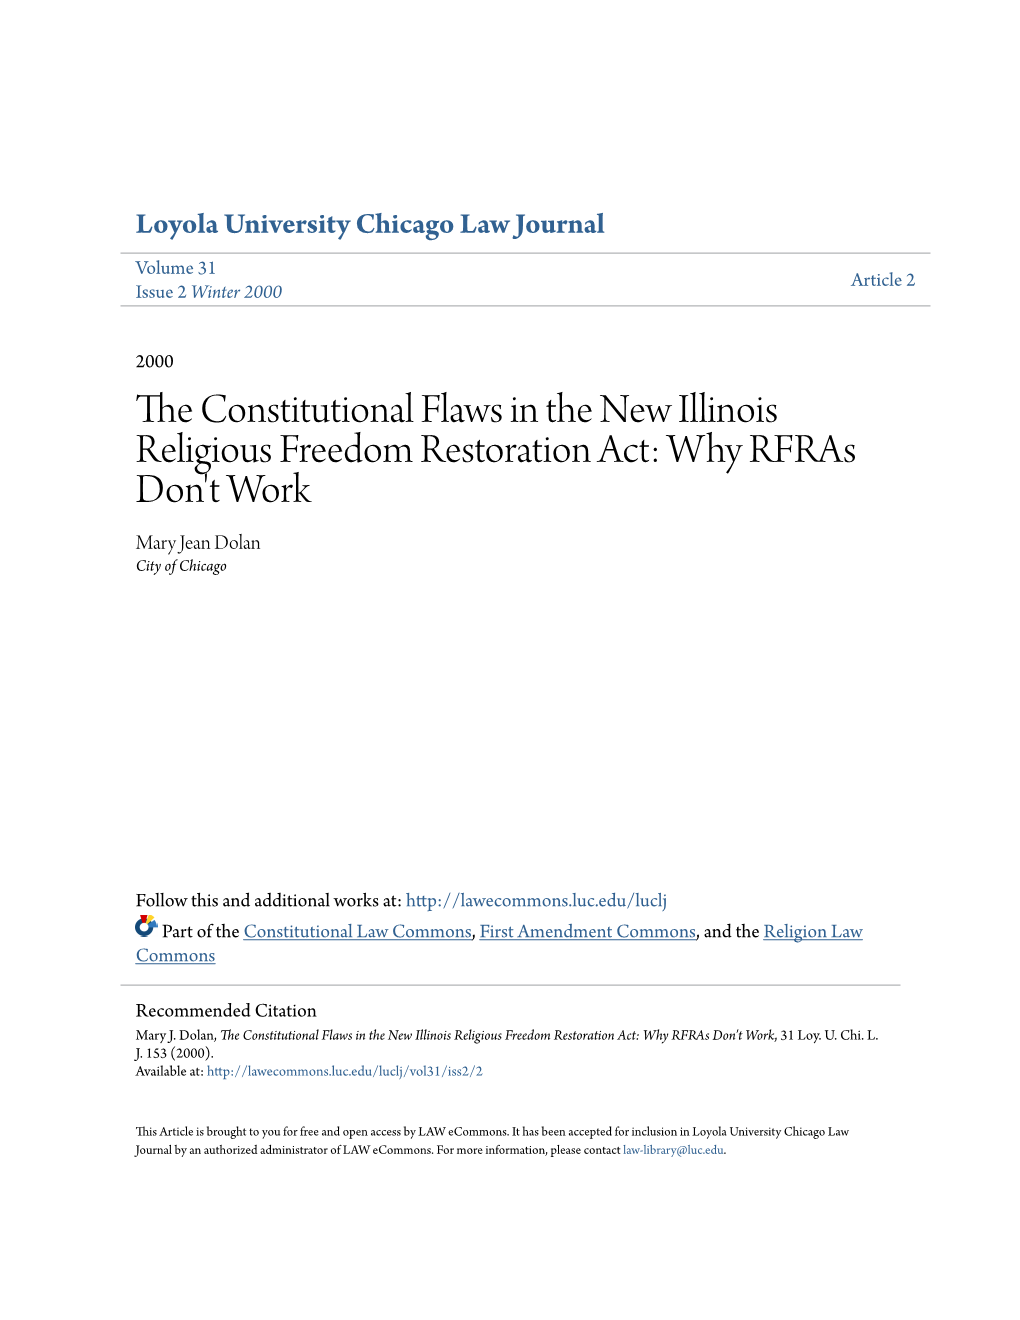 The Constitutional Flaws in the New Illinois Religious Freedom Restoration Act: Why Rfras Don't Work, 31 Loy